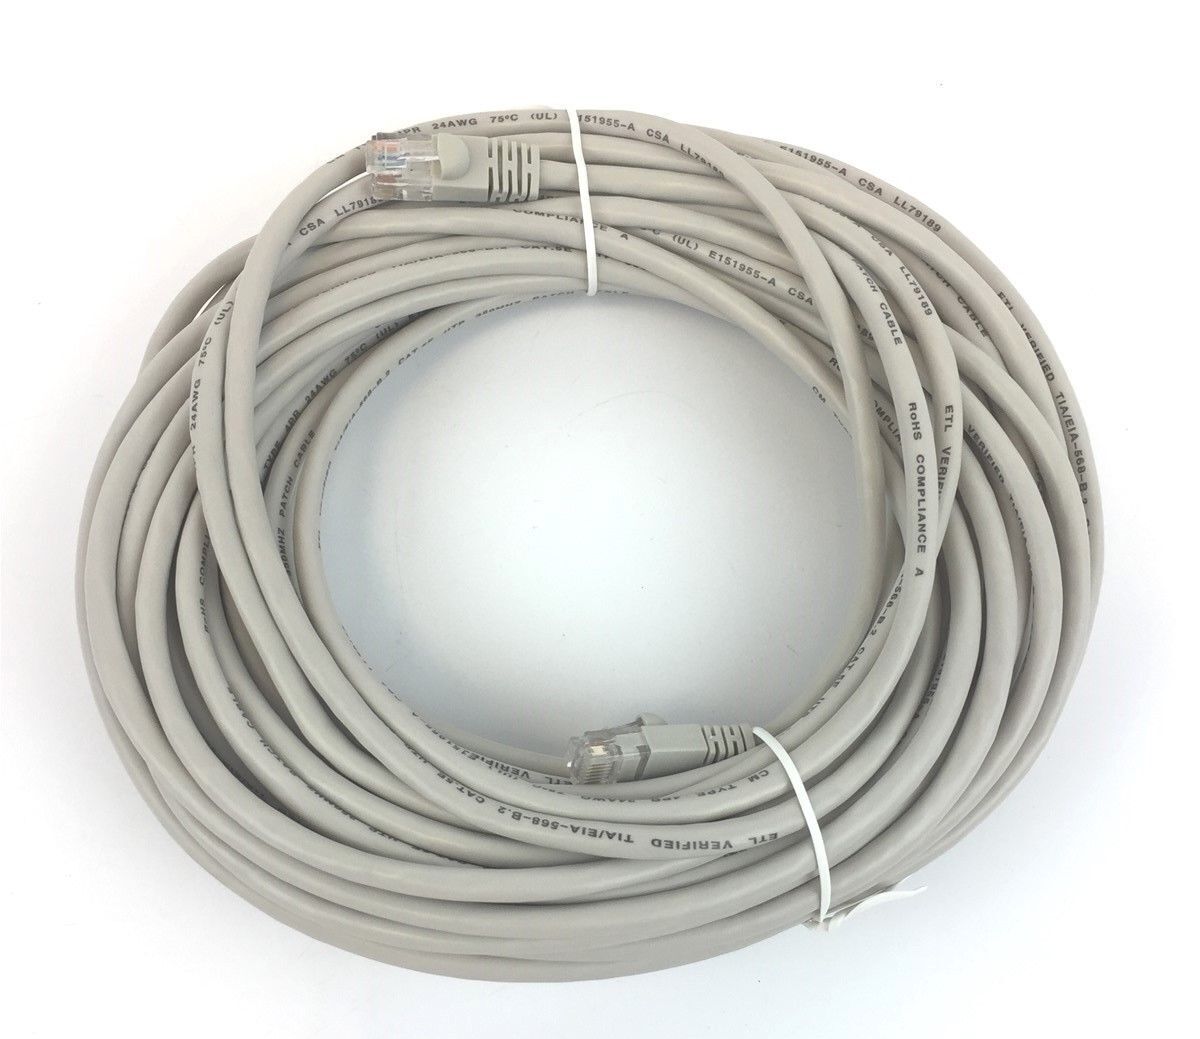 Apple Standard Patch Cable 50ft CAT5E UTP 4P/24AWG KU-5ECA50F-GY